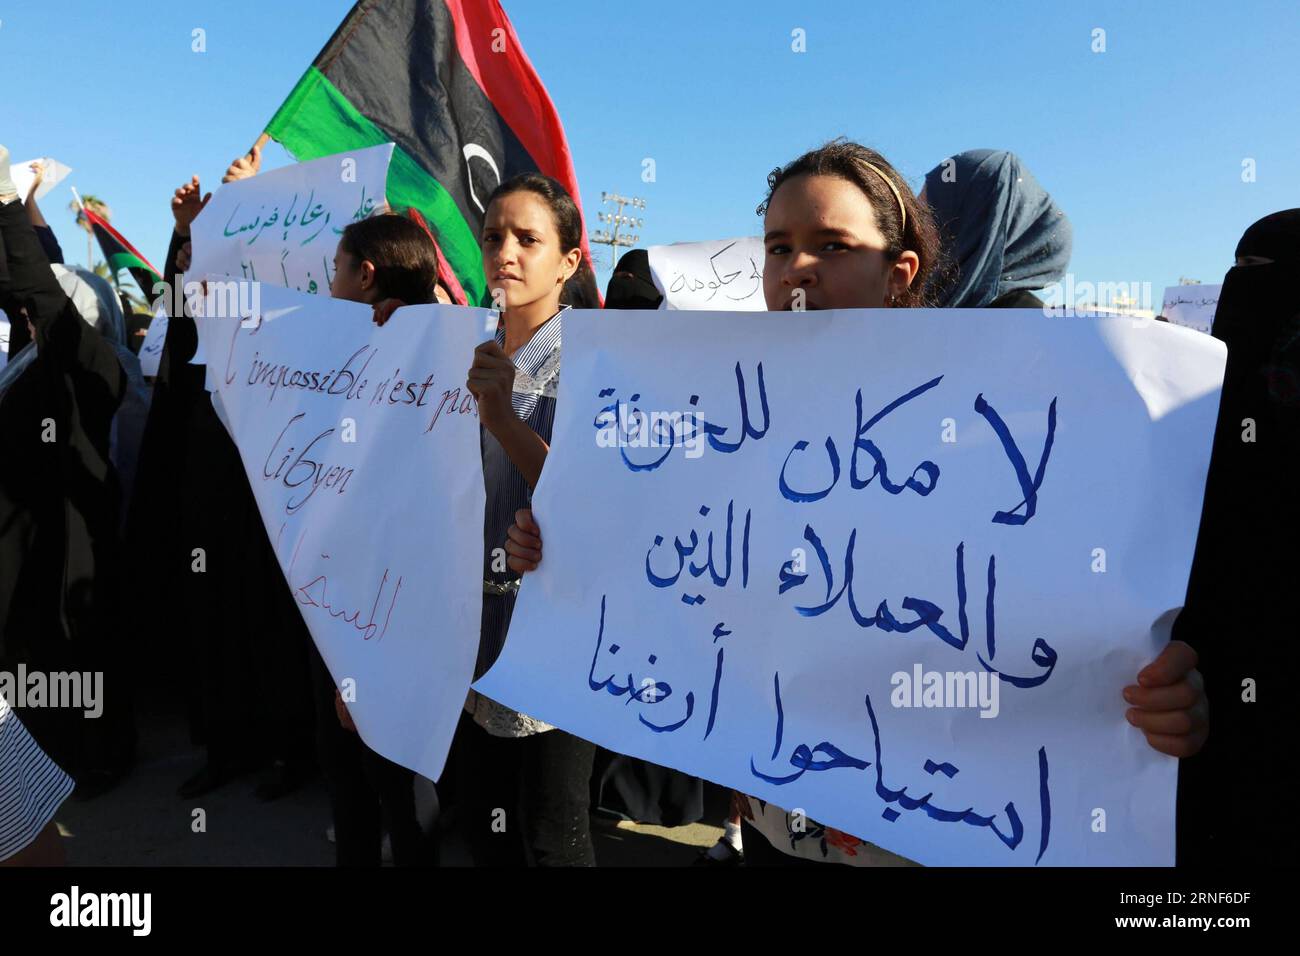 TRIPOLI, July 20, 2016 -- Libyan girls hold placards during a demonstration to protest against the French military intervention at Martyrs Square in Tripoli, capital of Libya, July 20, 2016. Three French soldiers have been killed in Libya where the country has special forces operating, the French Defence Ministry confirmed on Wednesday. )(zy) LIBYA-TRIPOLI-FRANCE-PROTEST HamzaxTurkia PUBLICATIONxNOTxINxCHN   Tripoli July 20 2016 Libyan Girls Hold placards during a Demonstration to Protest against The French Military INTERVENTION AT Martyrs Square in Tripoli Capital of Libya July 20 2016 Three Stock Photo